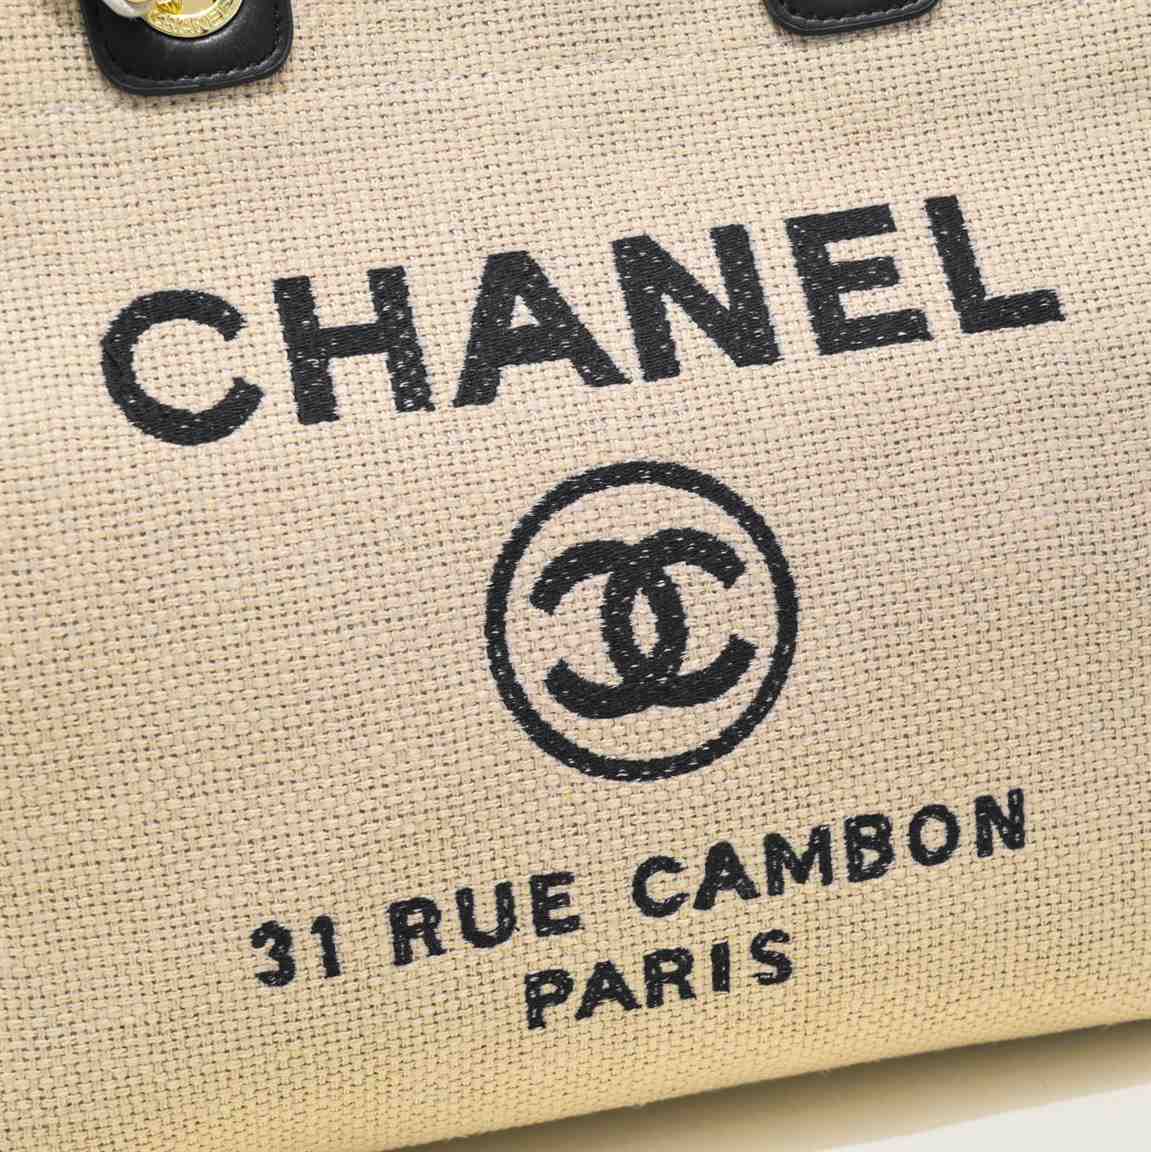 Chanel Medium Deauville Tote bag replica - Affordable Luxury Bags